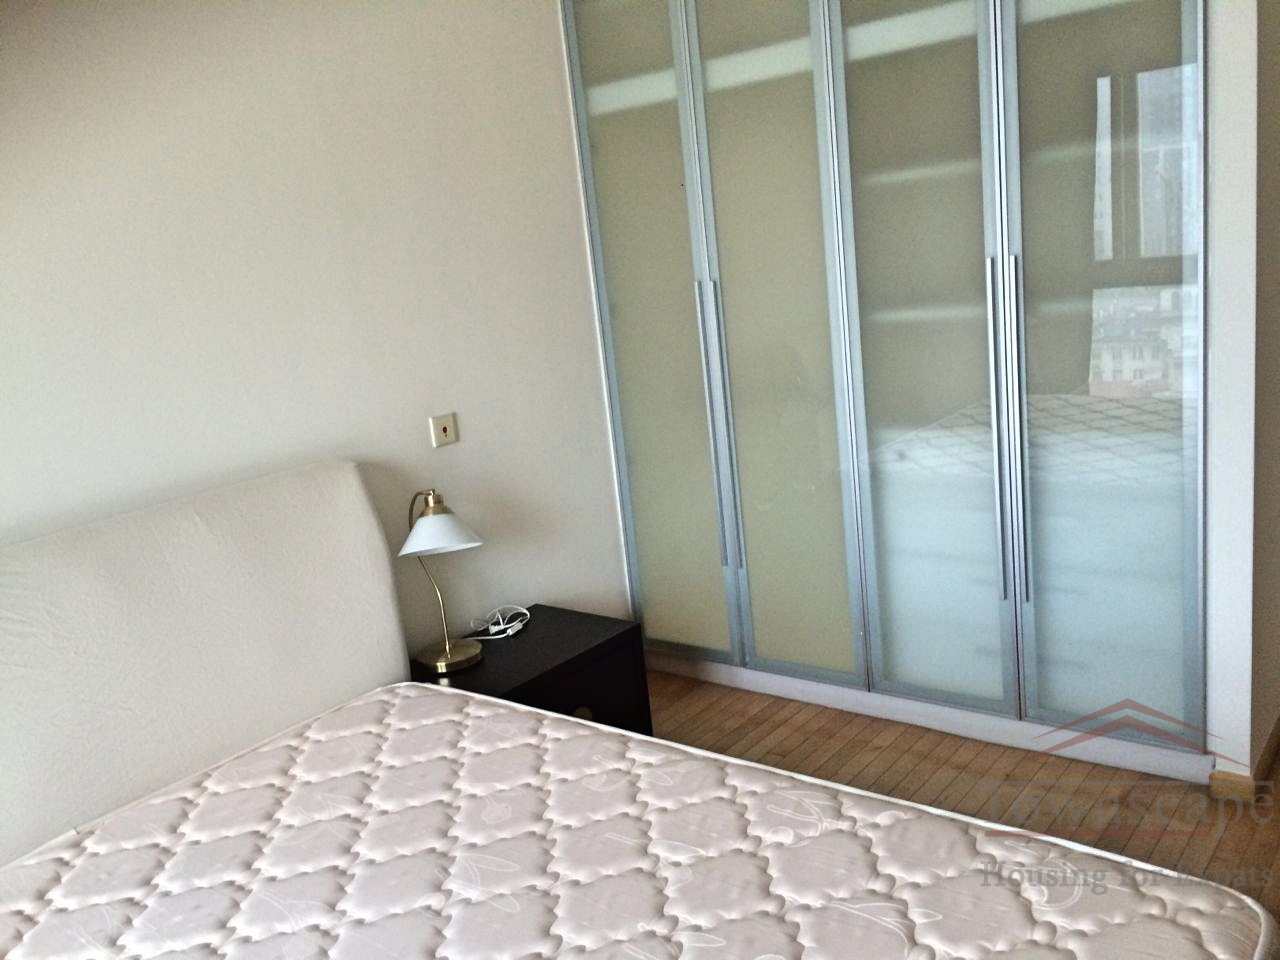 Shanghai 3br apartment 3BR Apartment nr Jingan Temple, clubhouse included